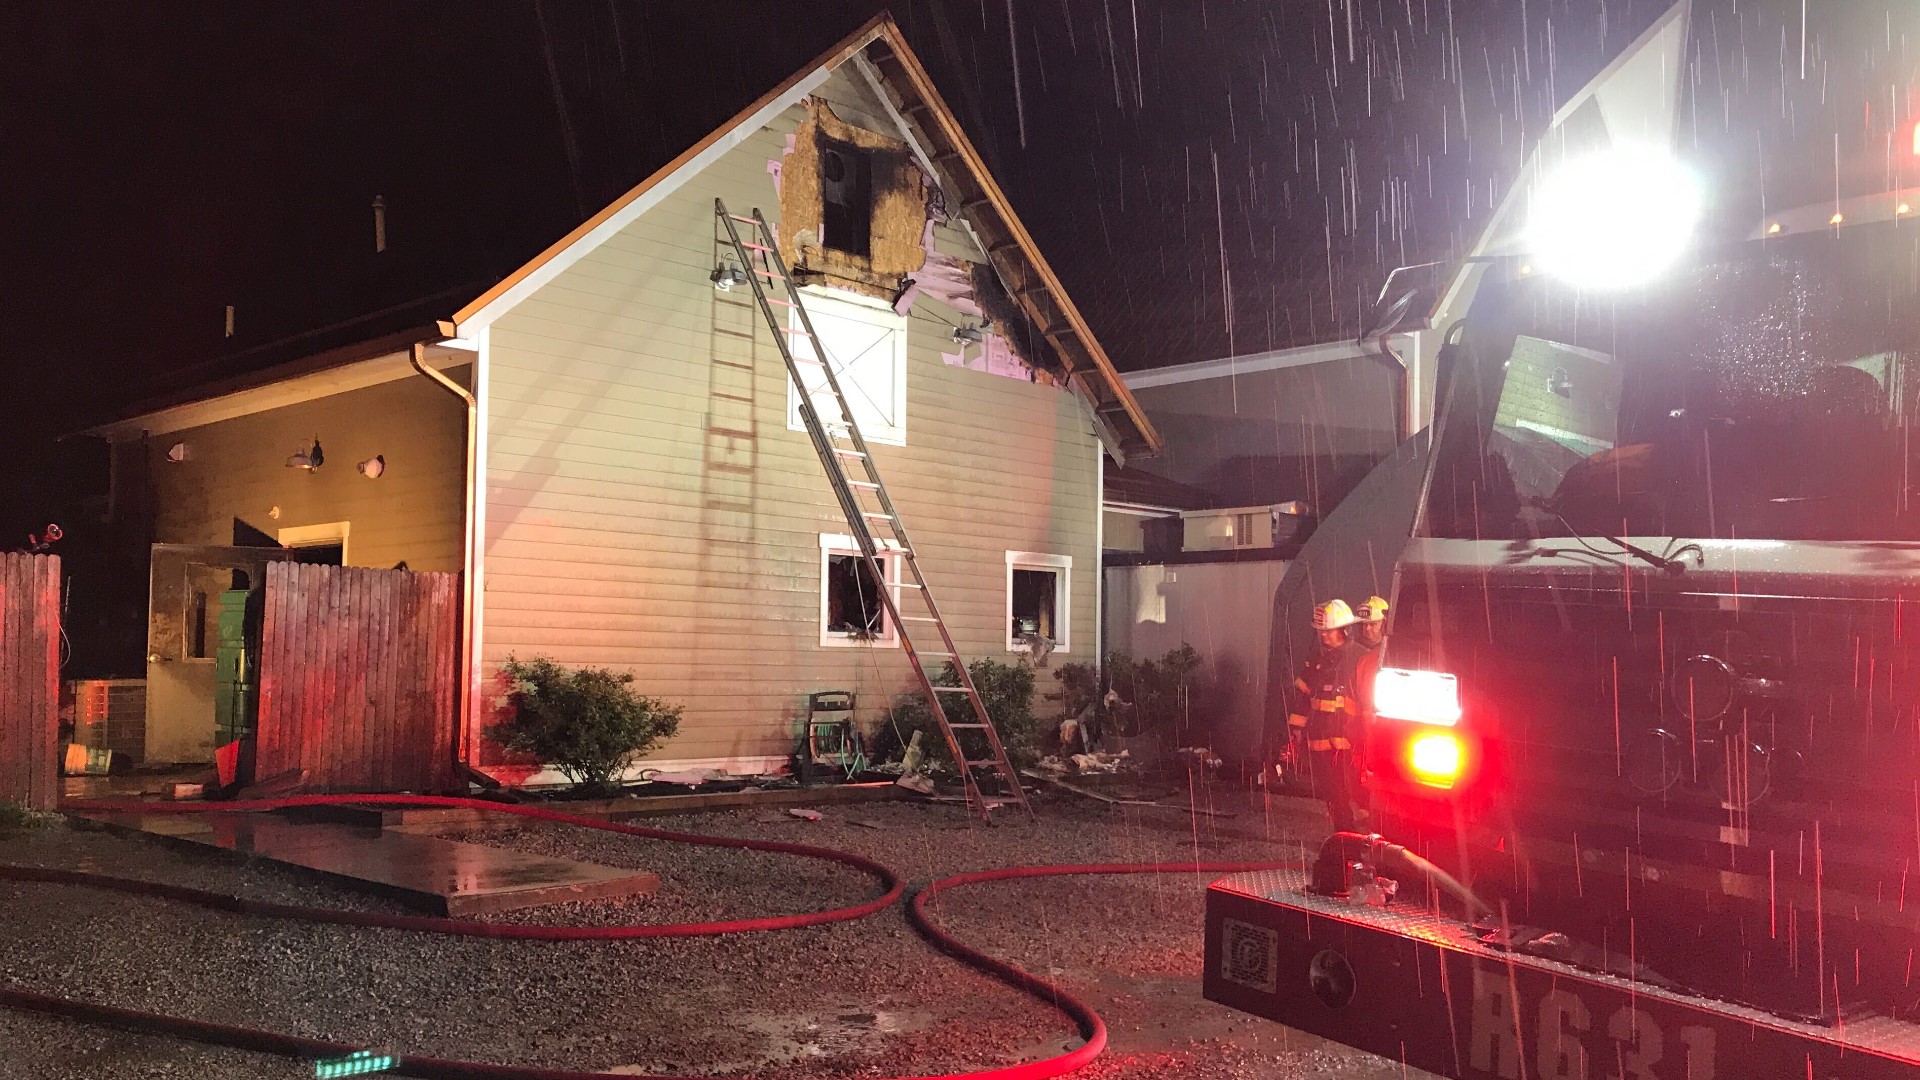 No injuries were reported and the cause of how the fires started is under investigation.